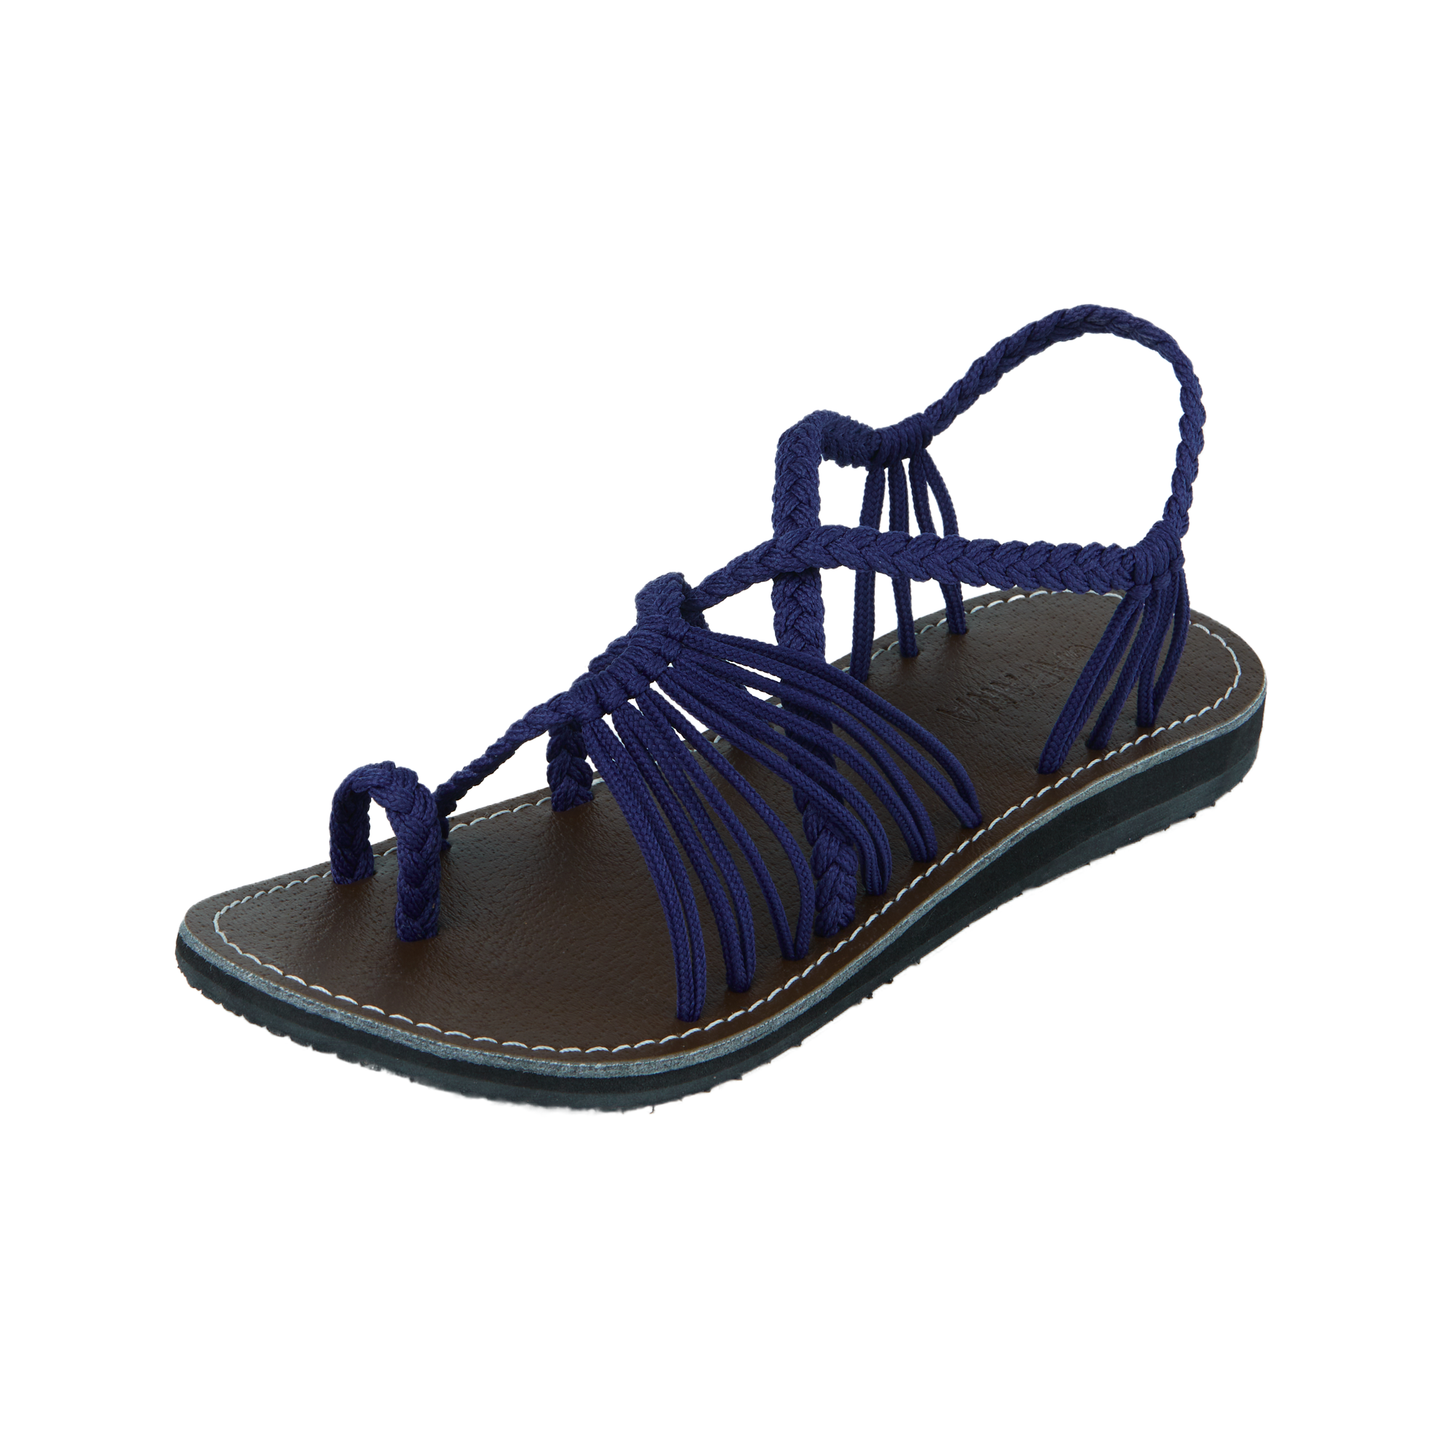 Hand woven sandals Lapis Blue Rope Sandals on the side  in white background